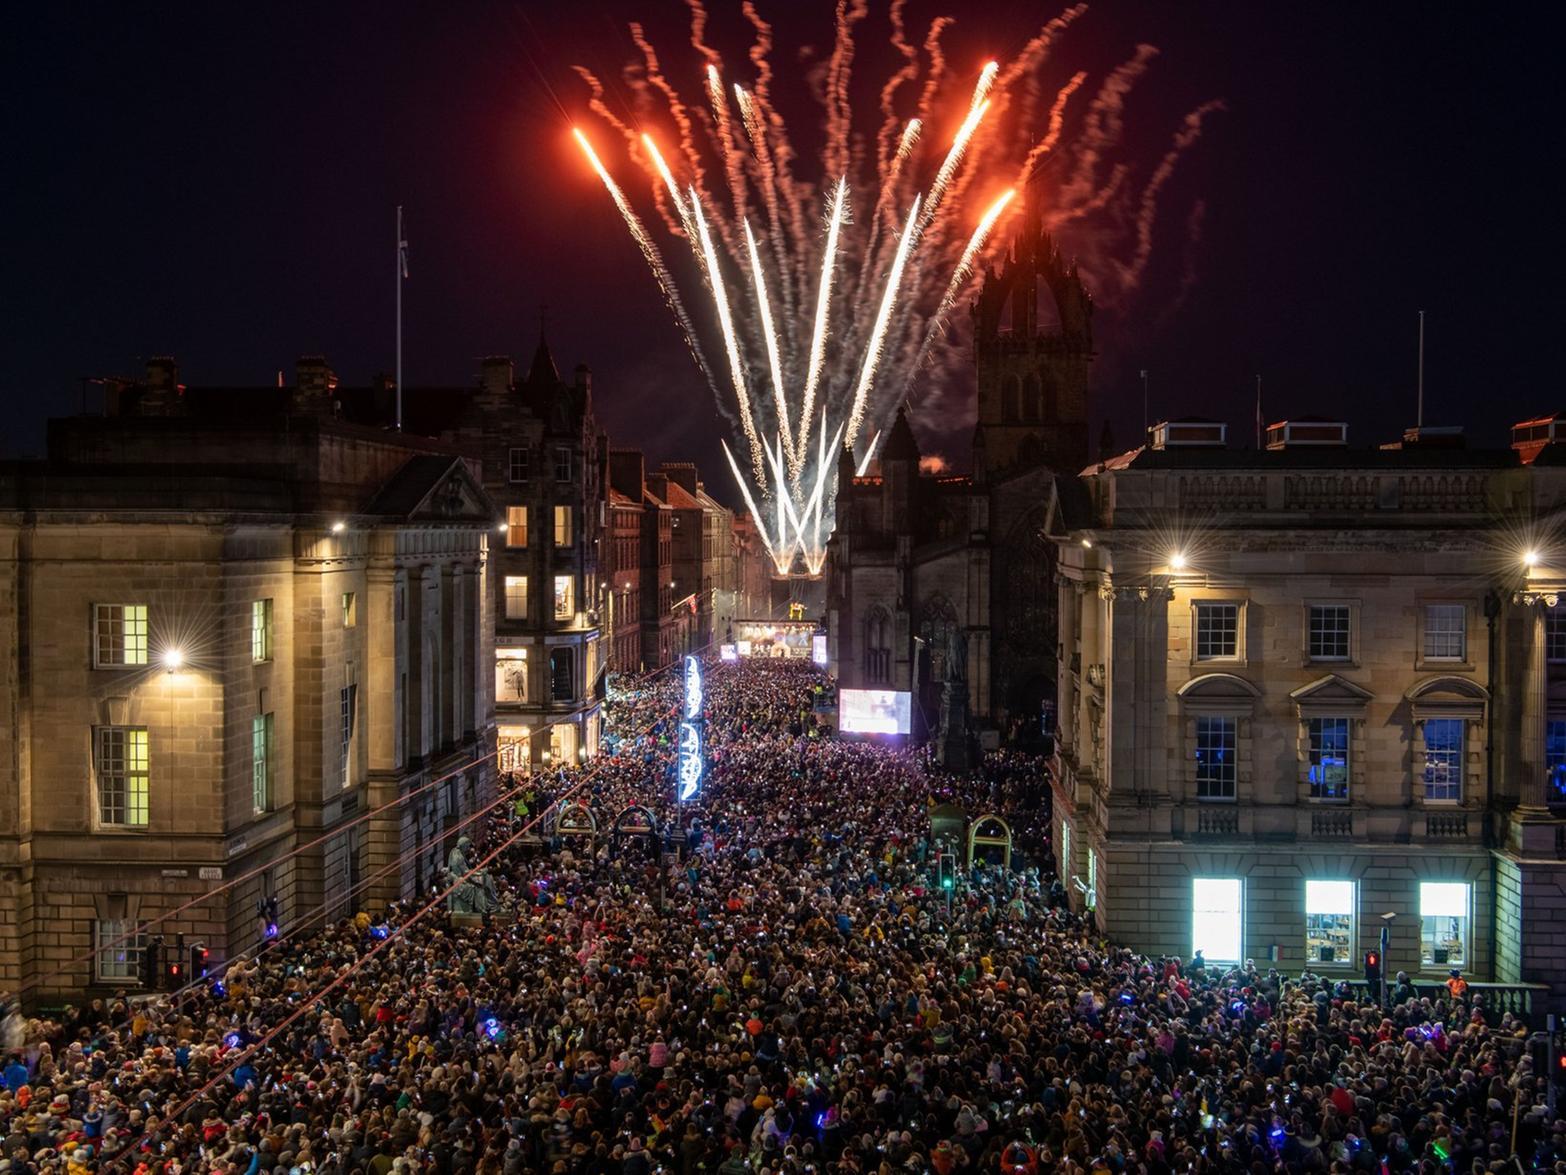 From 5pm, it was all about the fireworks as thousands of revellers were wowed by the diplay above the city